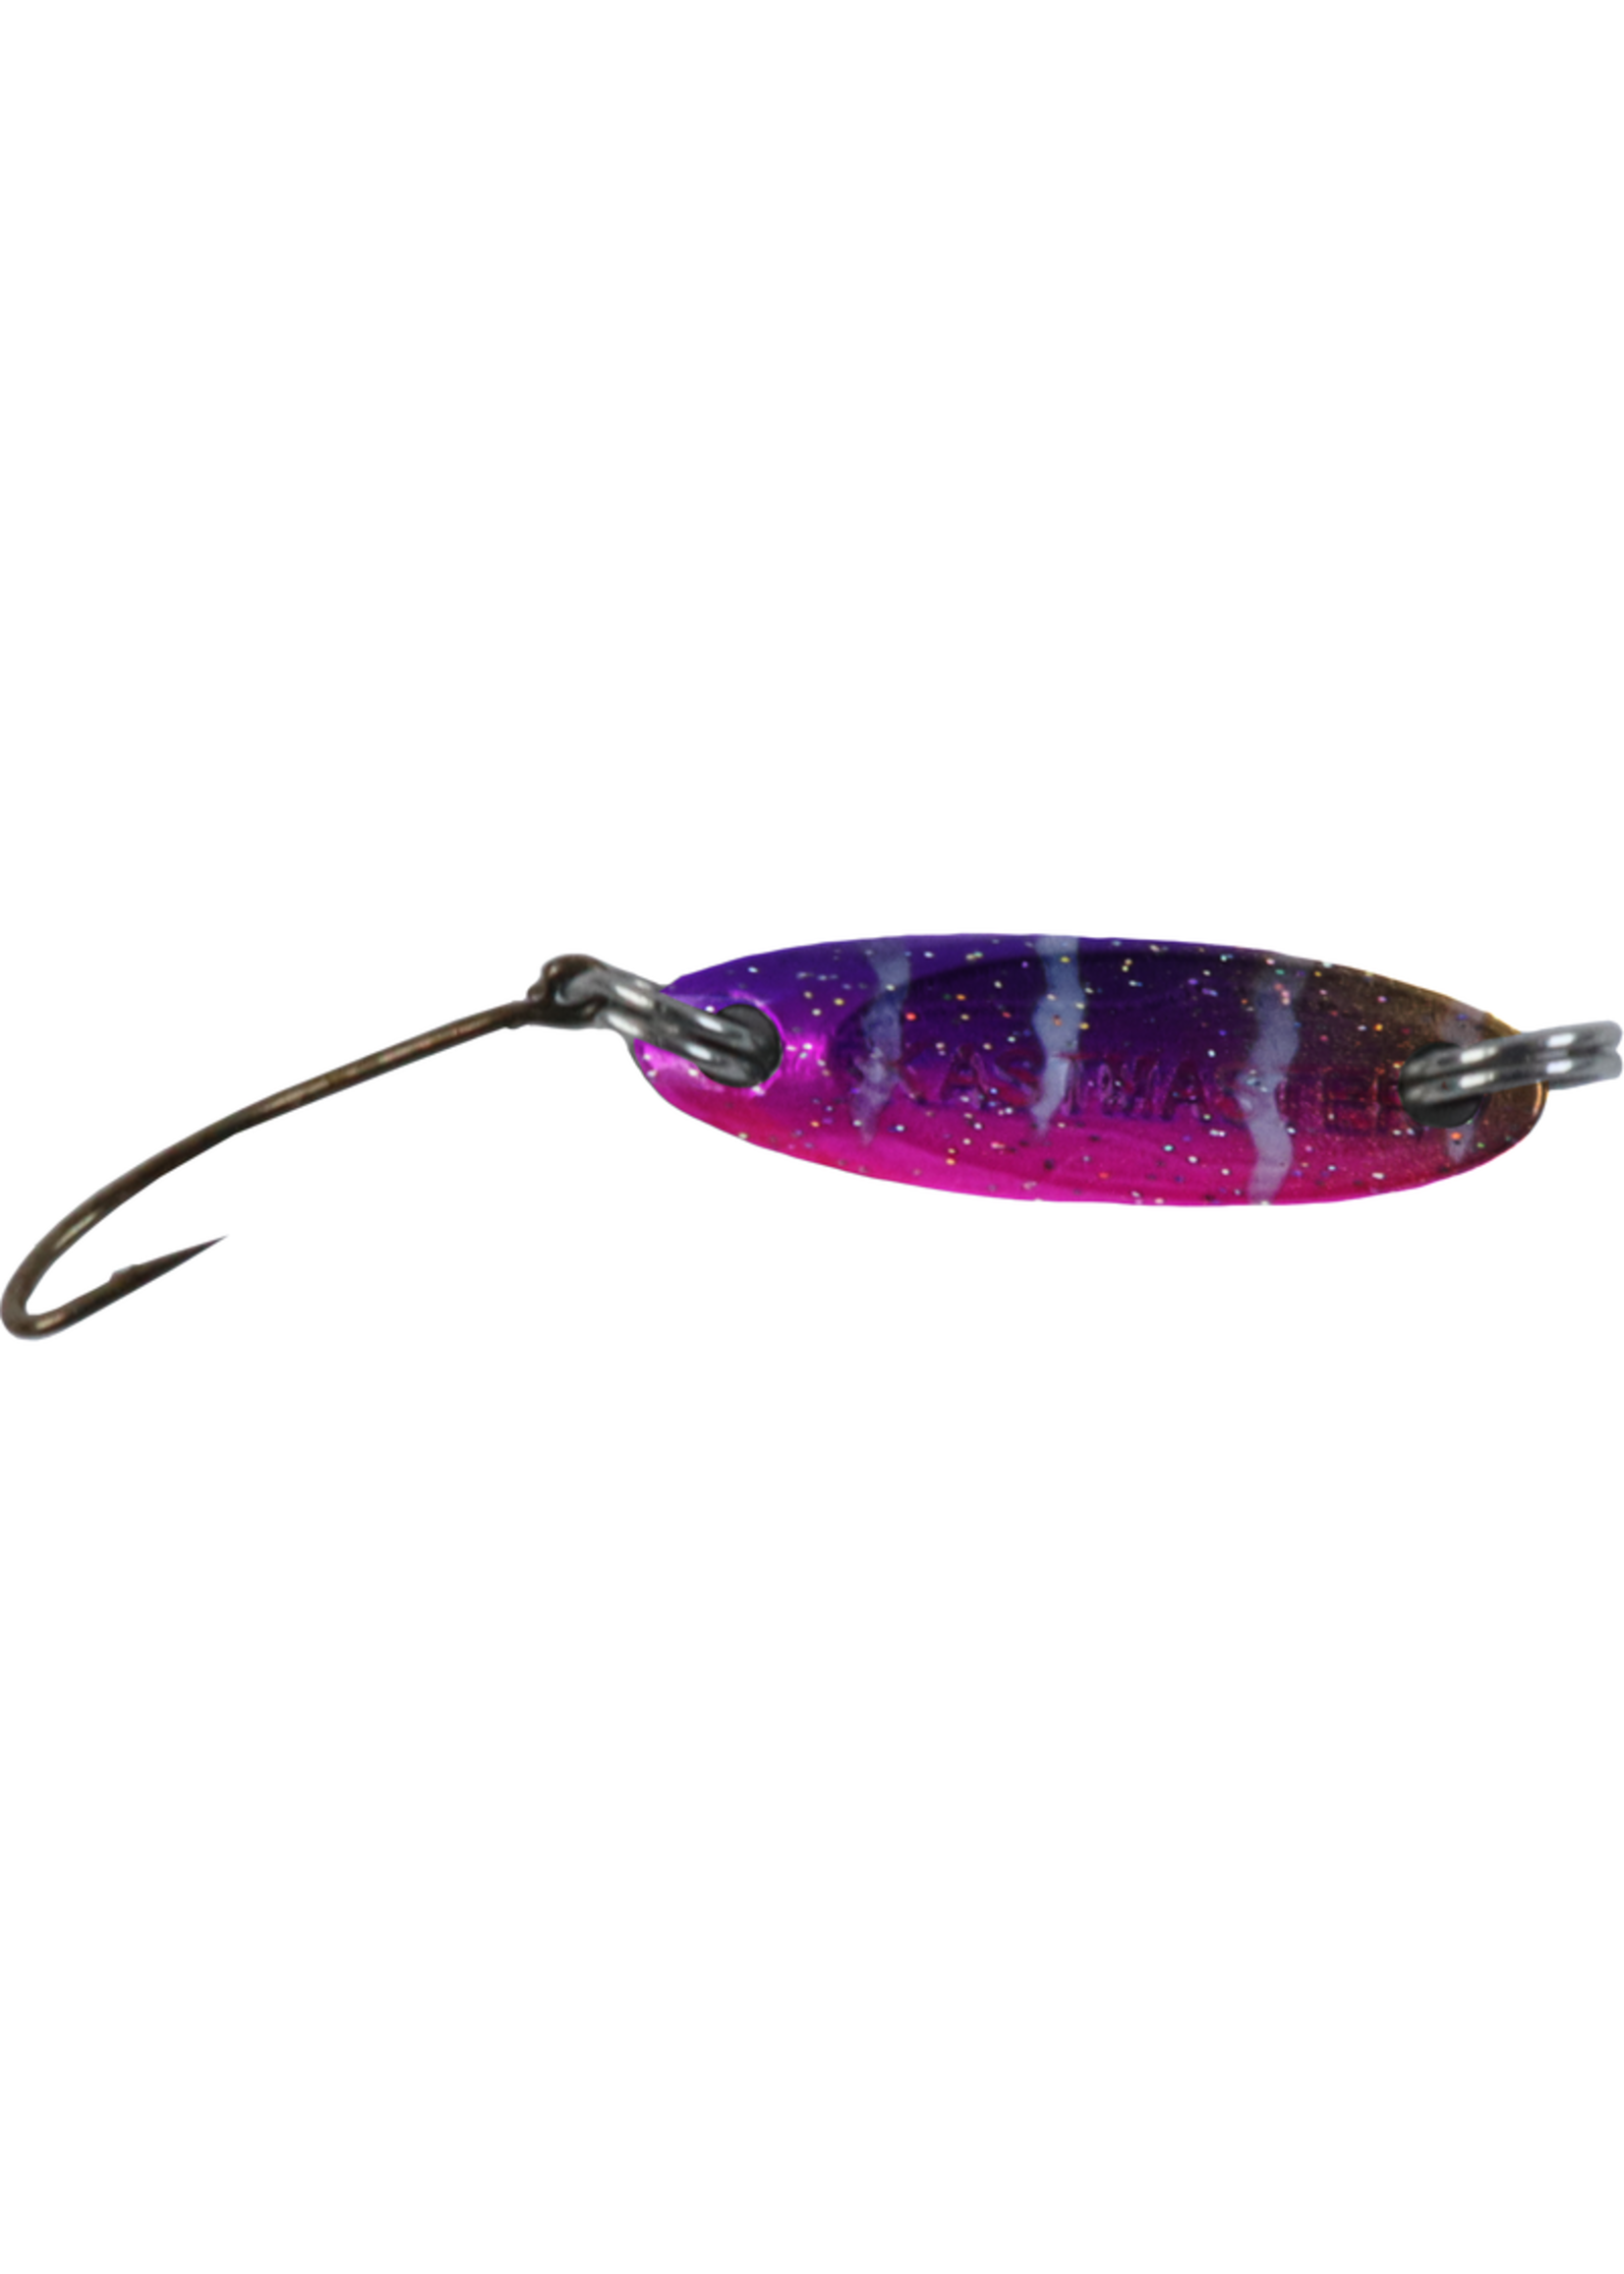 Acme Kastmaster Tungsten Micro Series - Tackle Shack